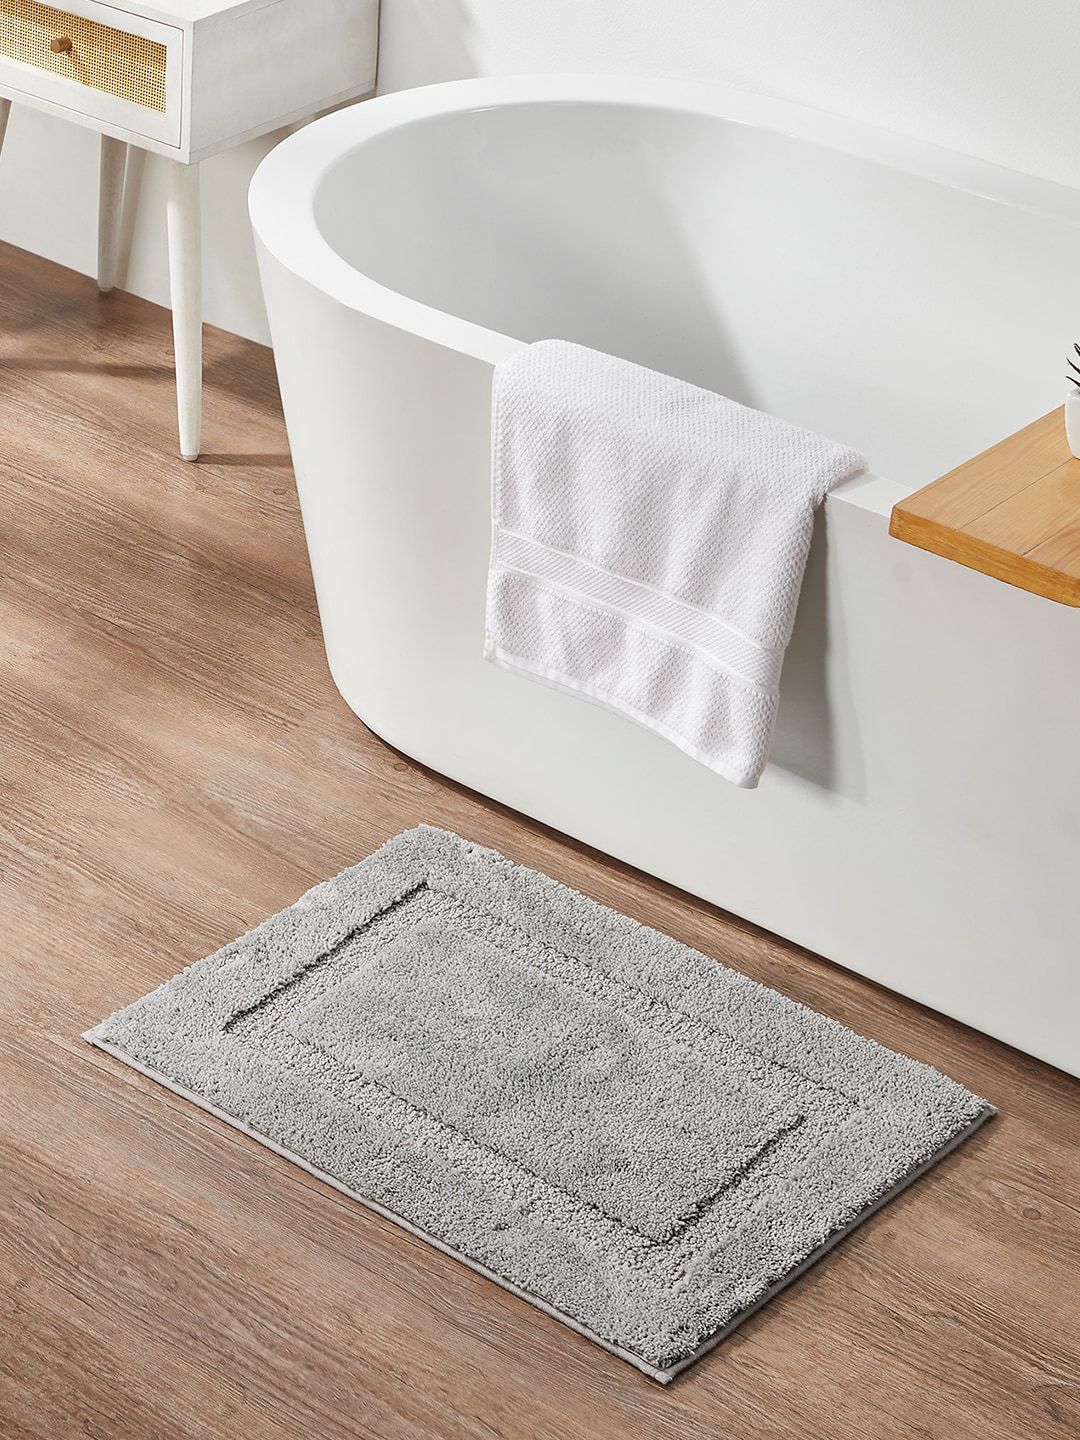 Pano Silver-Coloured Solid 1600 GSM Anti-Slip Bath Mat Price in India